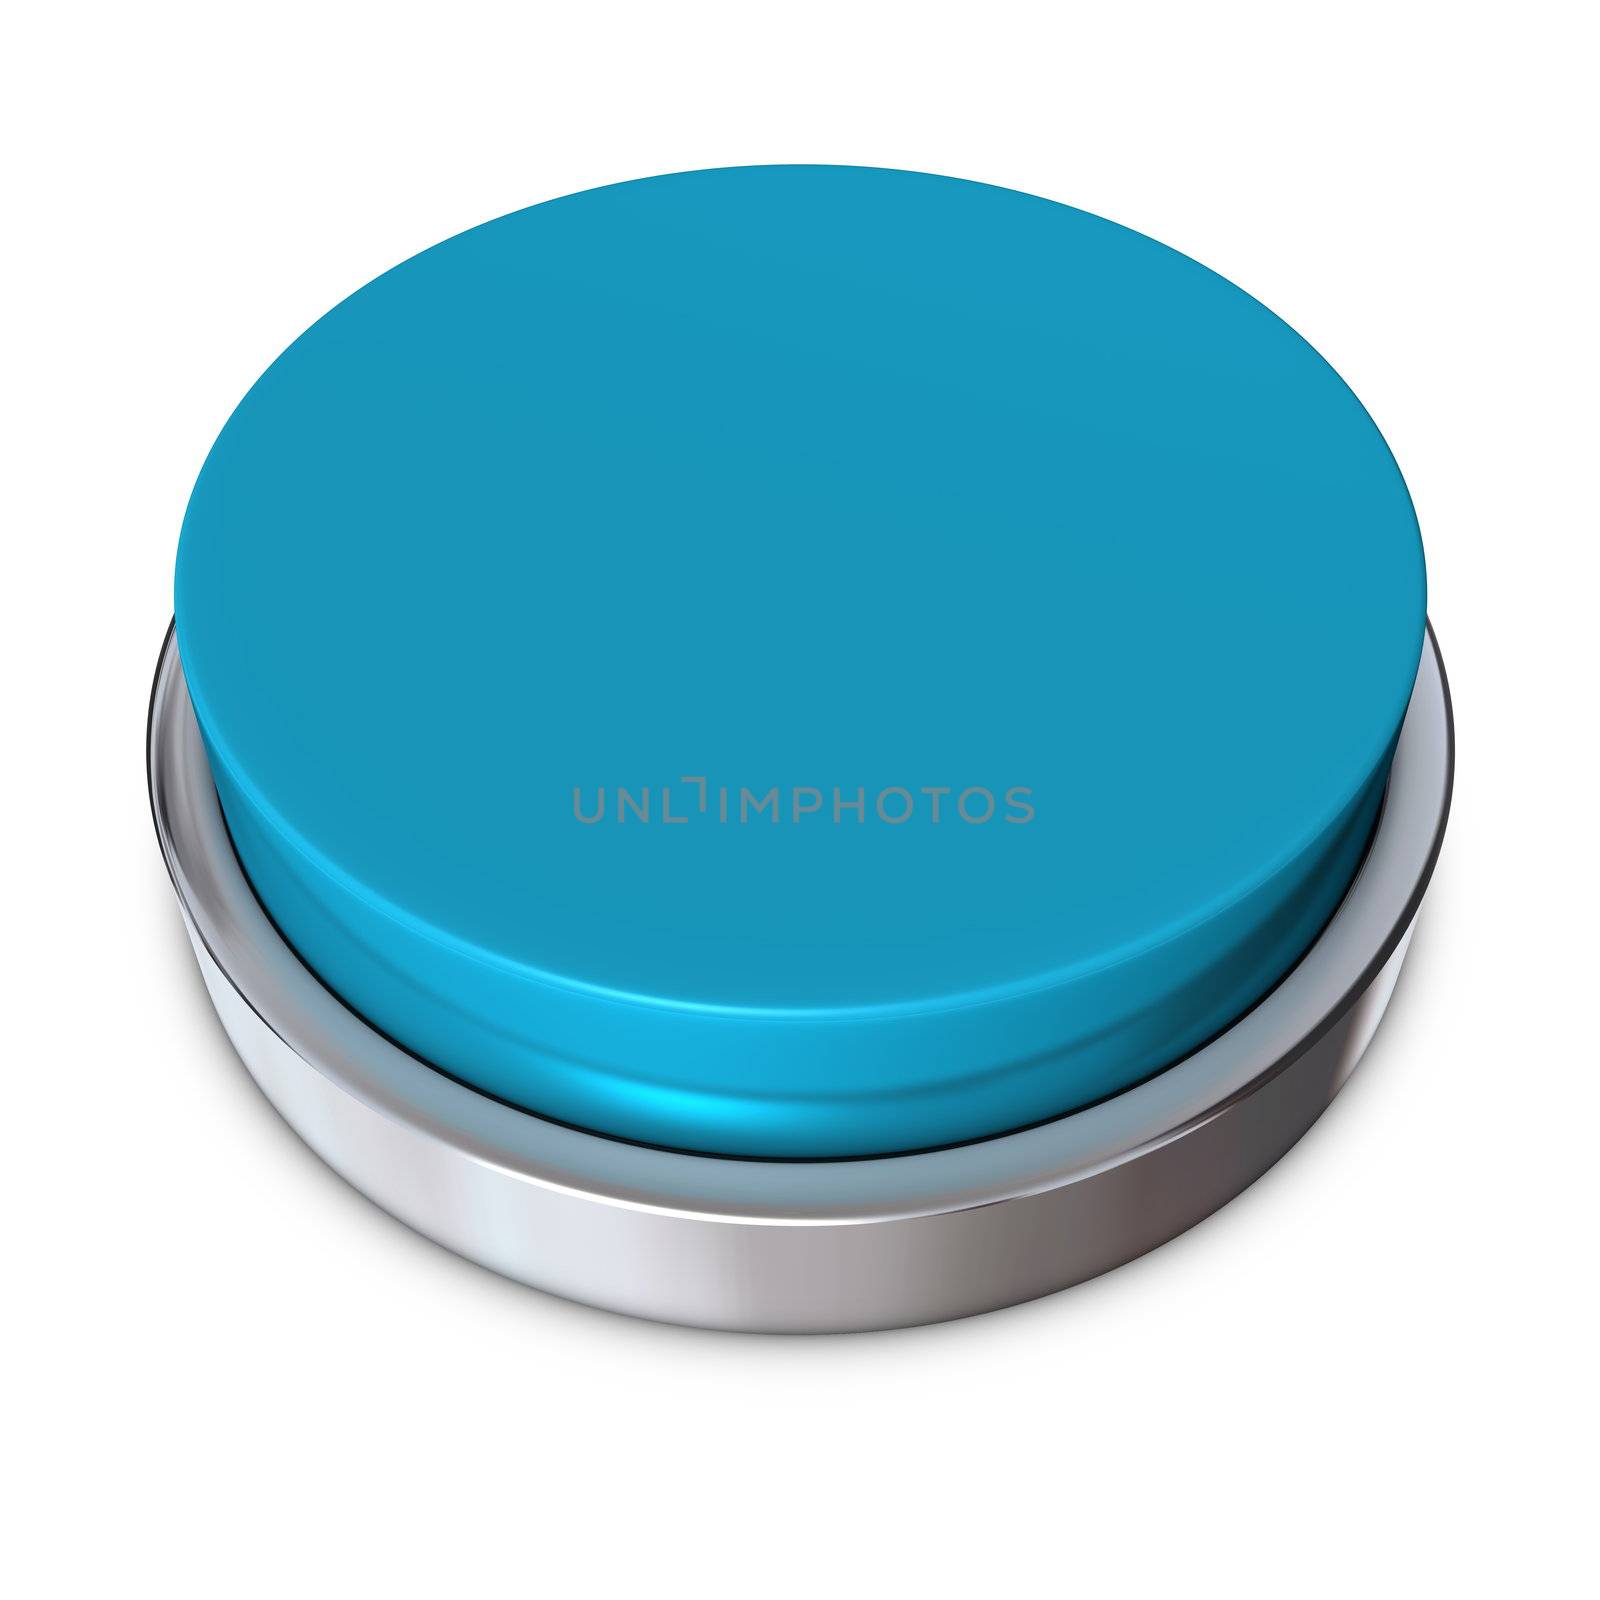 light blue round push button bordered by a metallic ring - design template